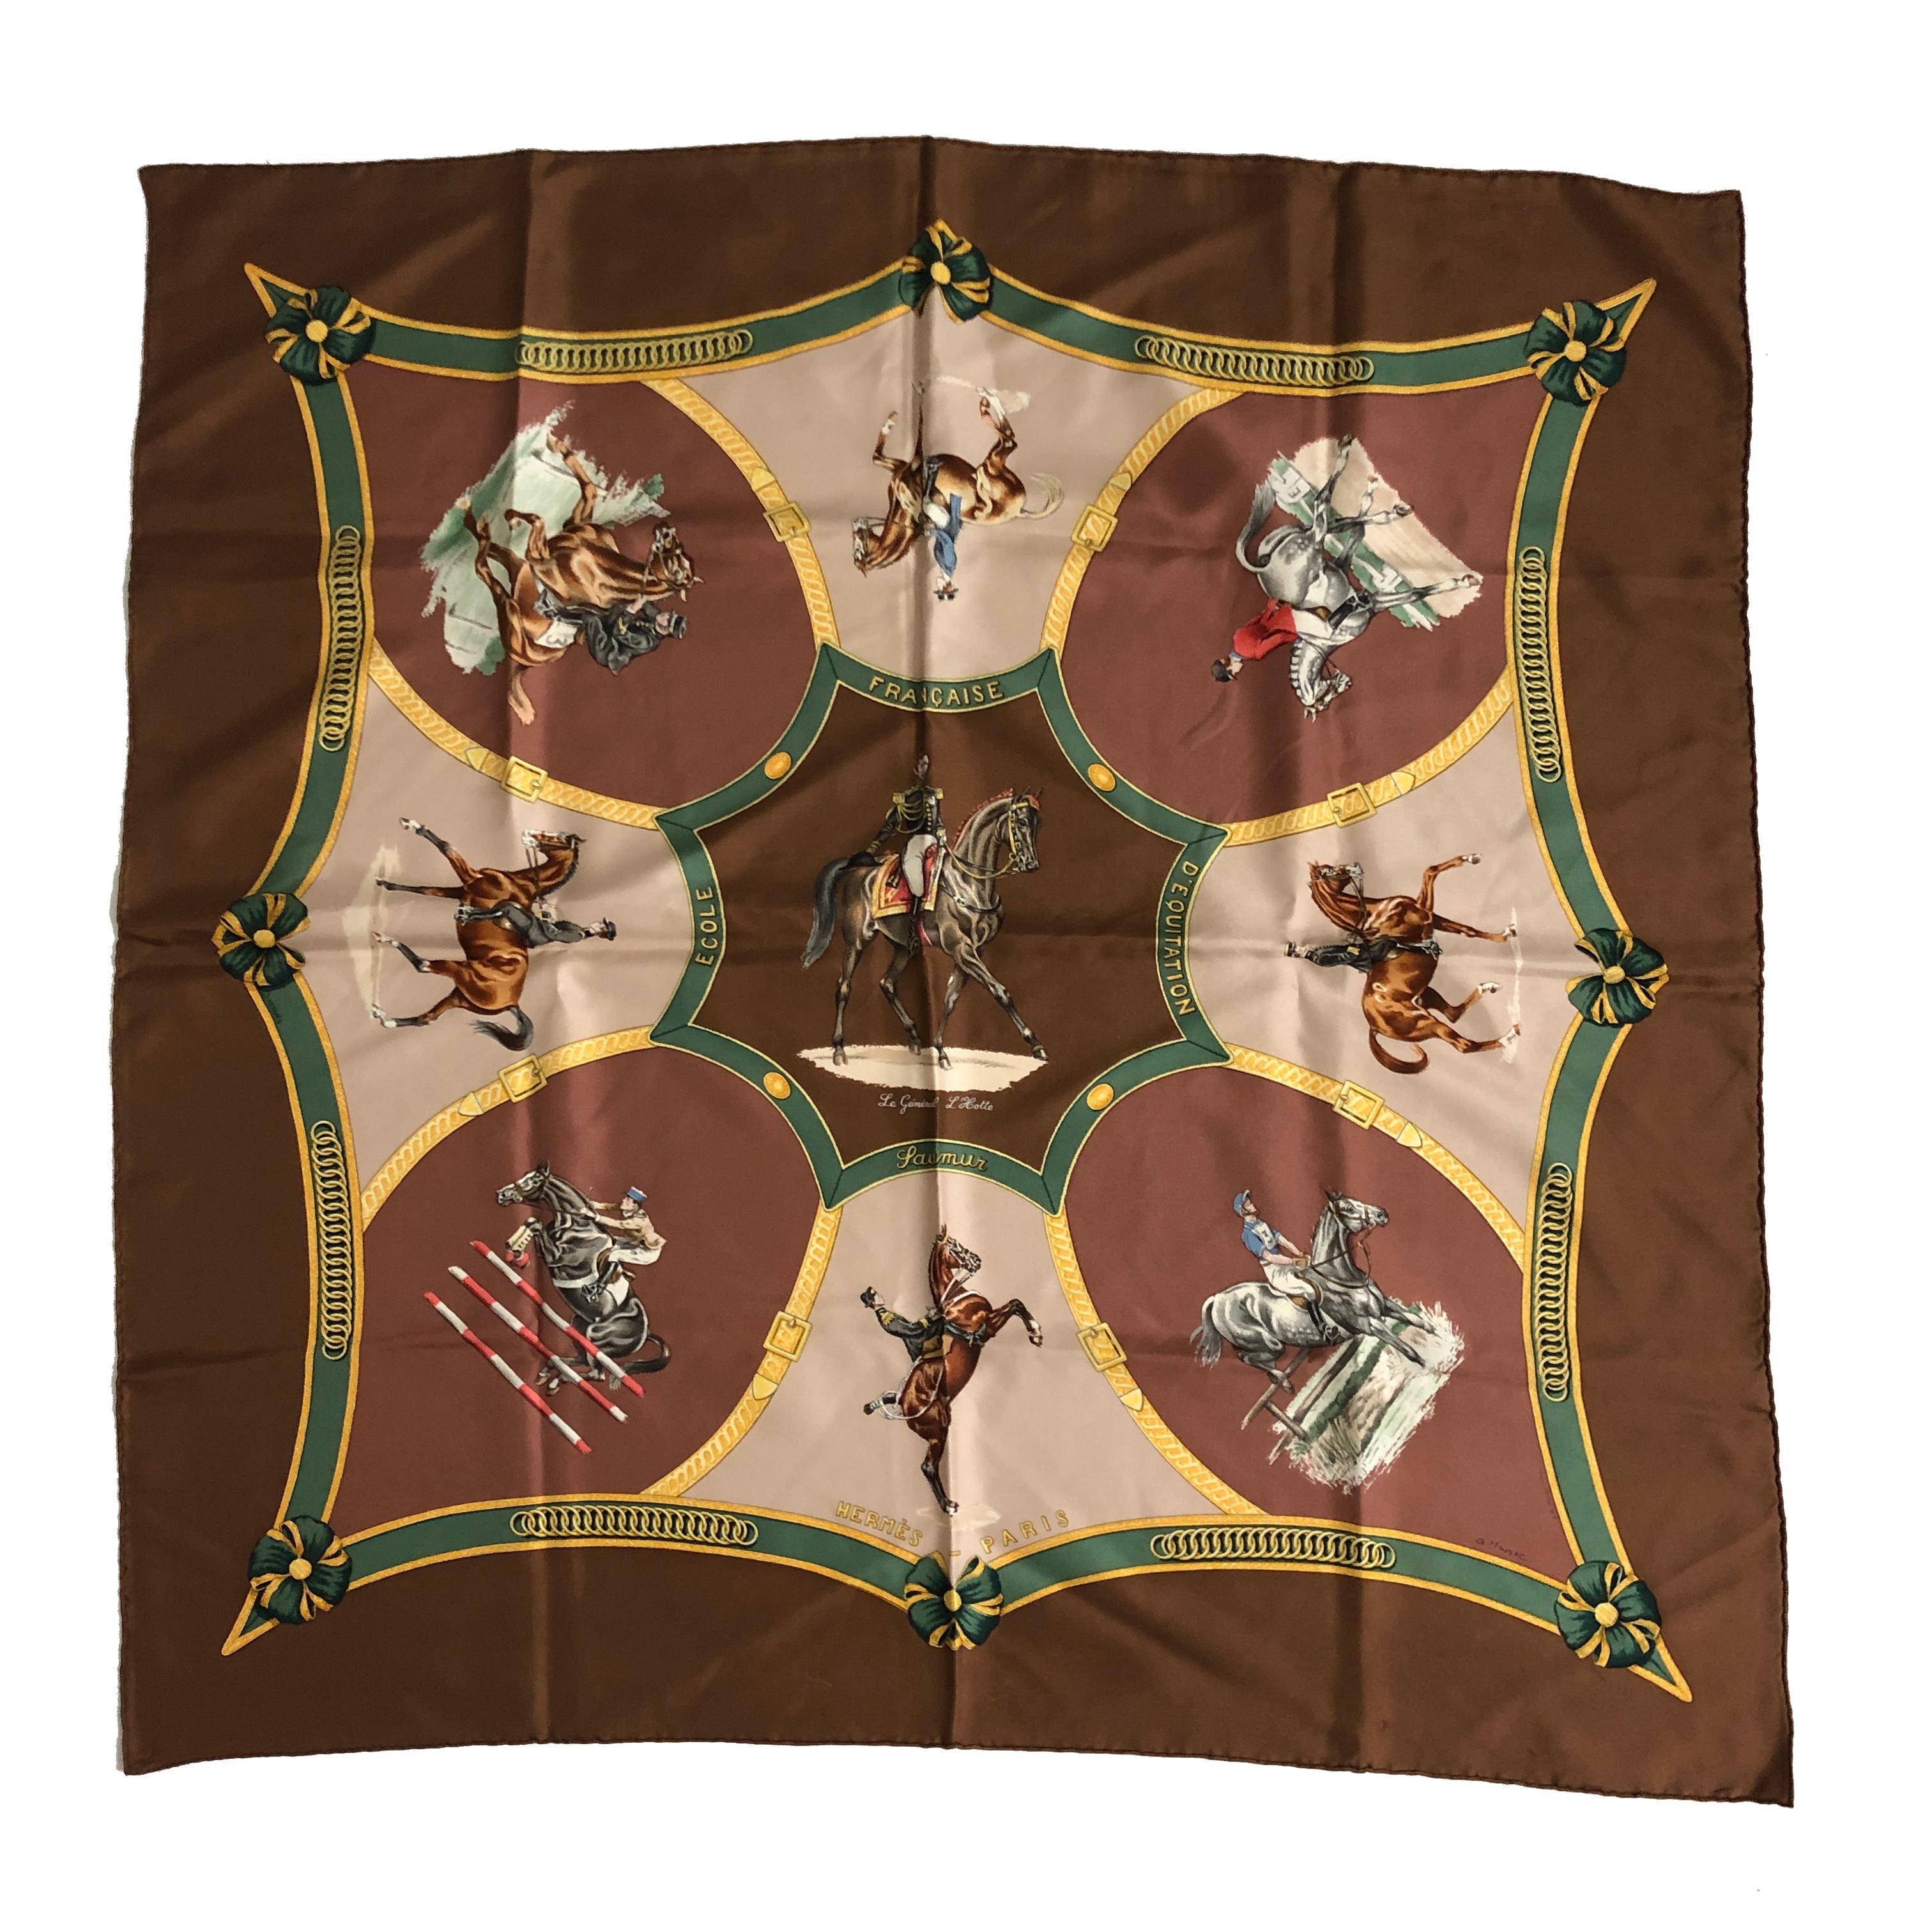 Authentic, preowned, vintage Hermes Ecole Francaise d'Equitation Silk Scarf or Carre, 90cm in brown colorway, circa 1987.  Designed by Jean De Fougerolle & Margot Grygkar. Preowned/vintage with some signs of wear: a few tiny spots (hard to see